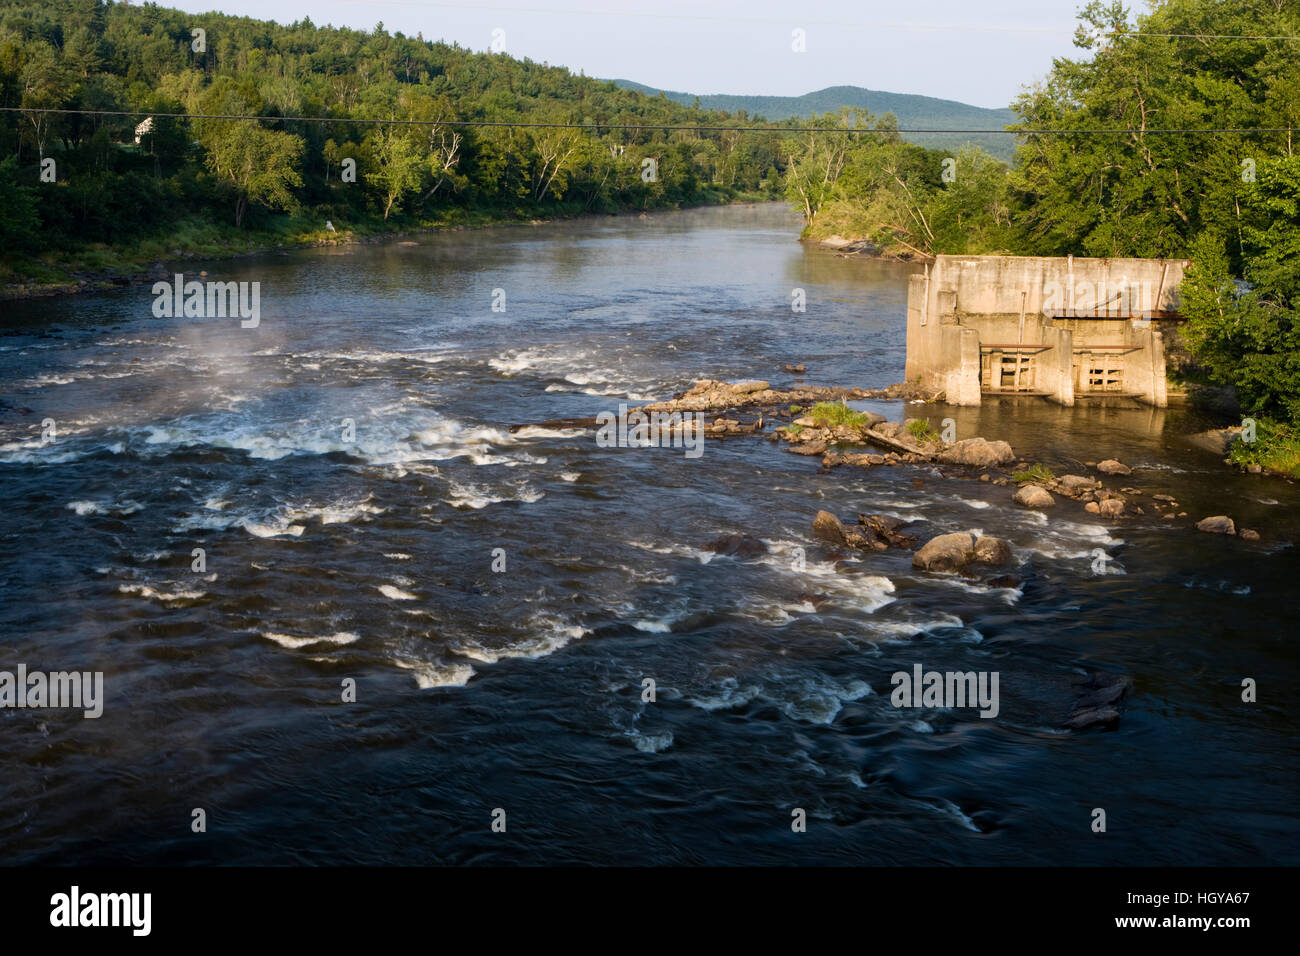 The site of the breached Wyoming Dam on the Connecticut River in Guildhall, Vermont. Stock Photo